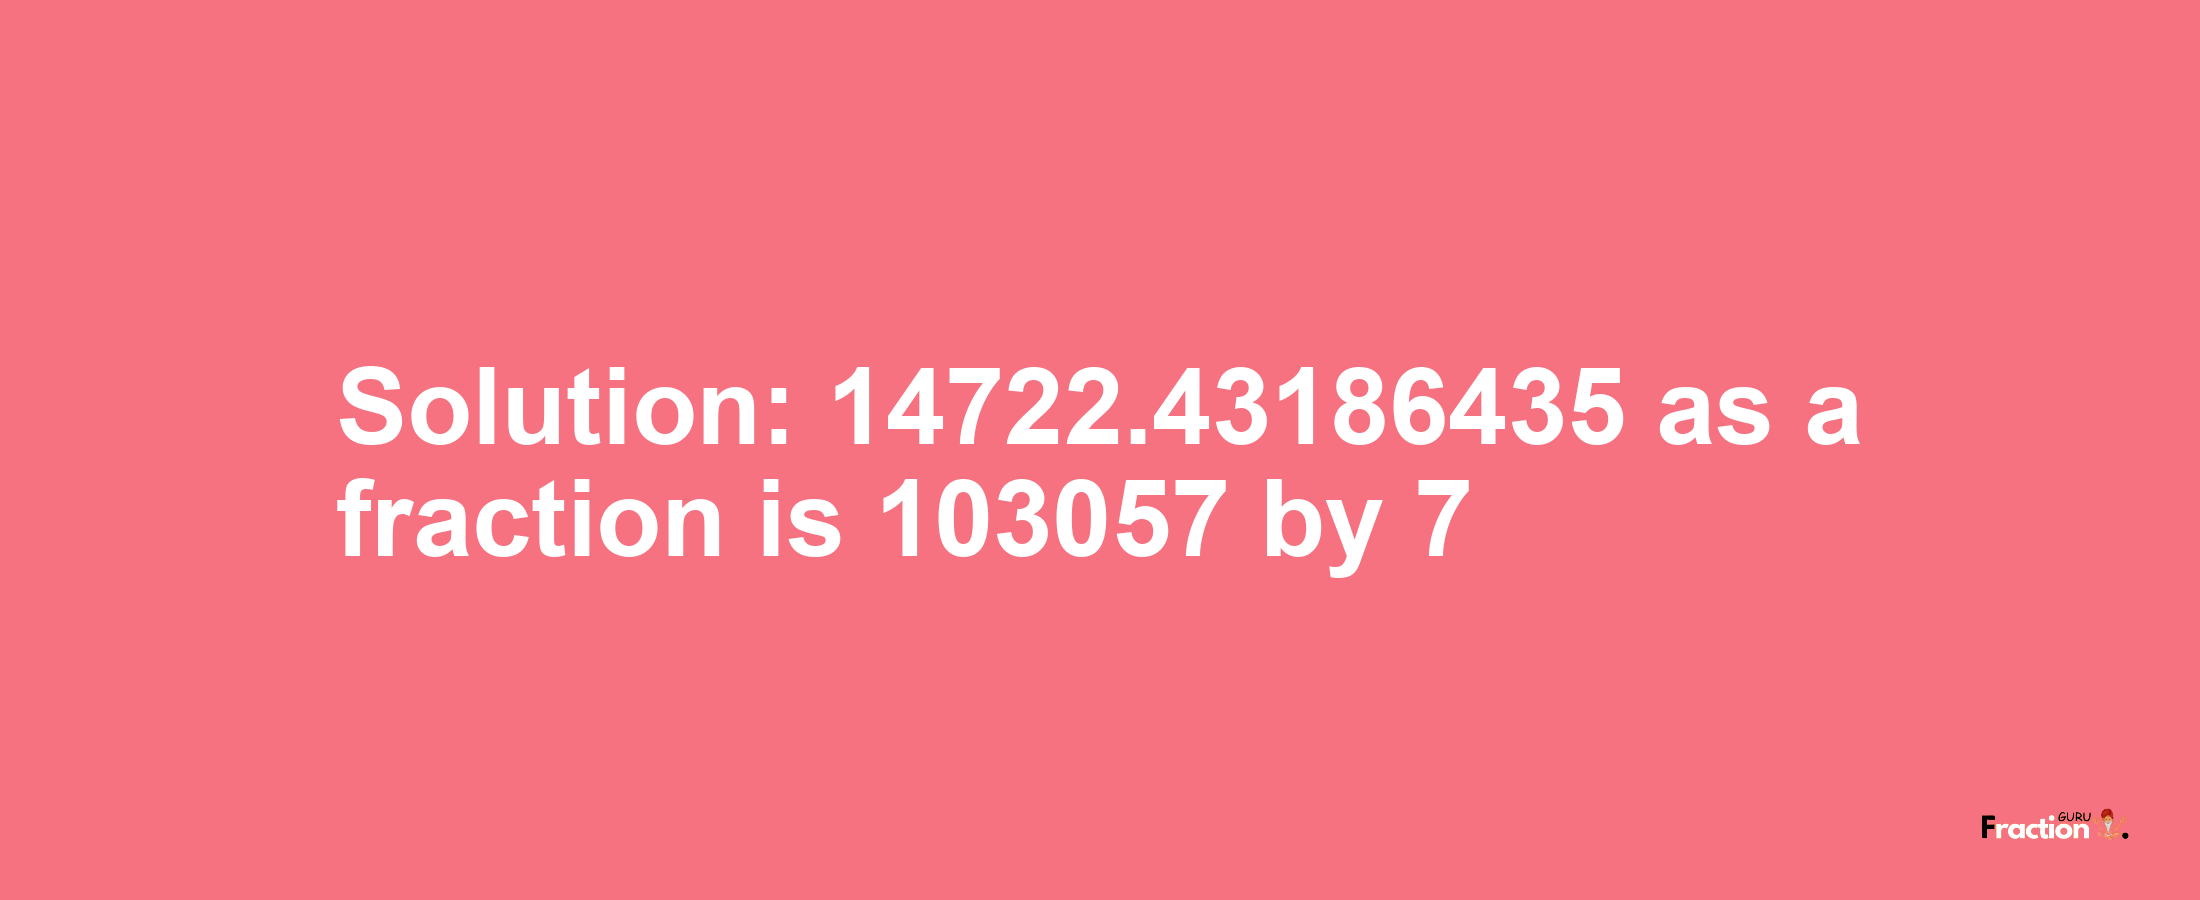 Solution:14722.43186435 as a fraction is 103057/7